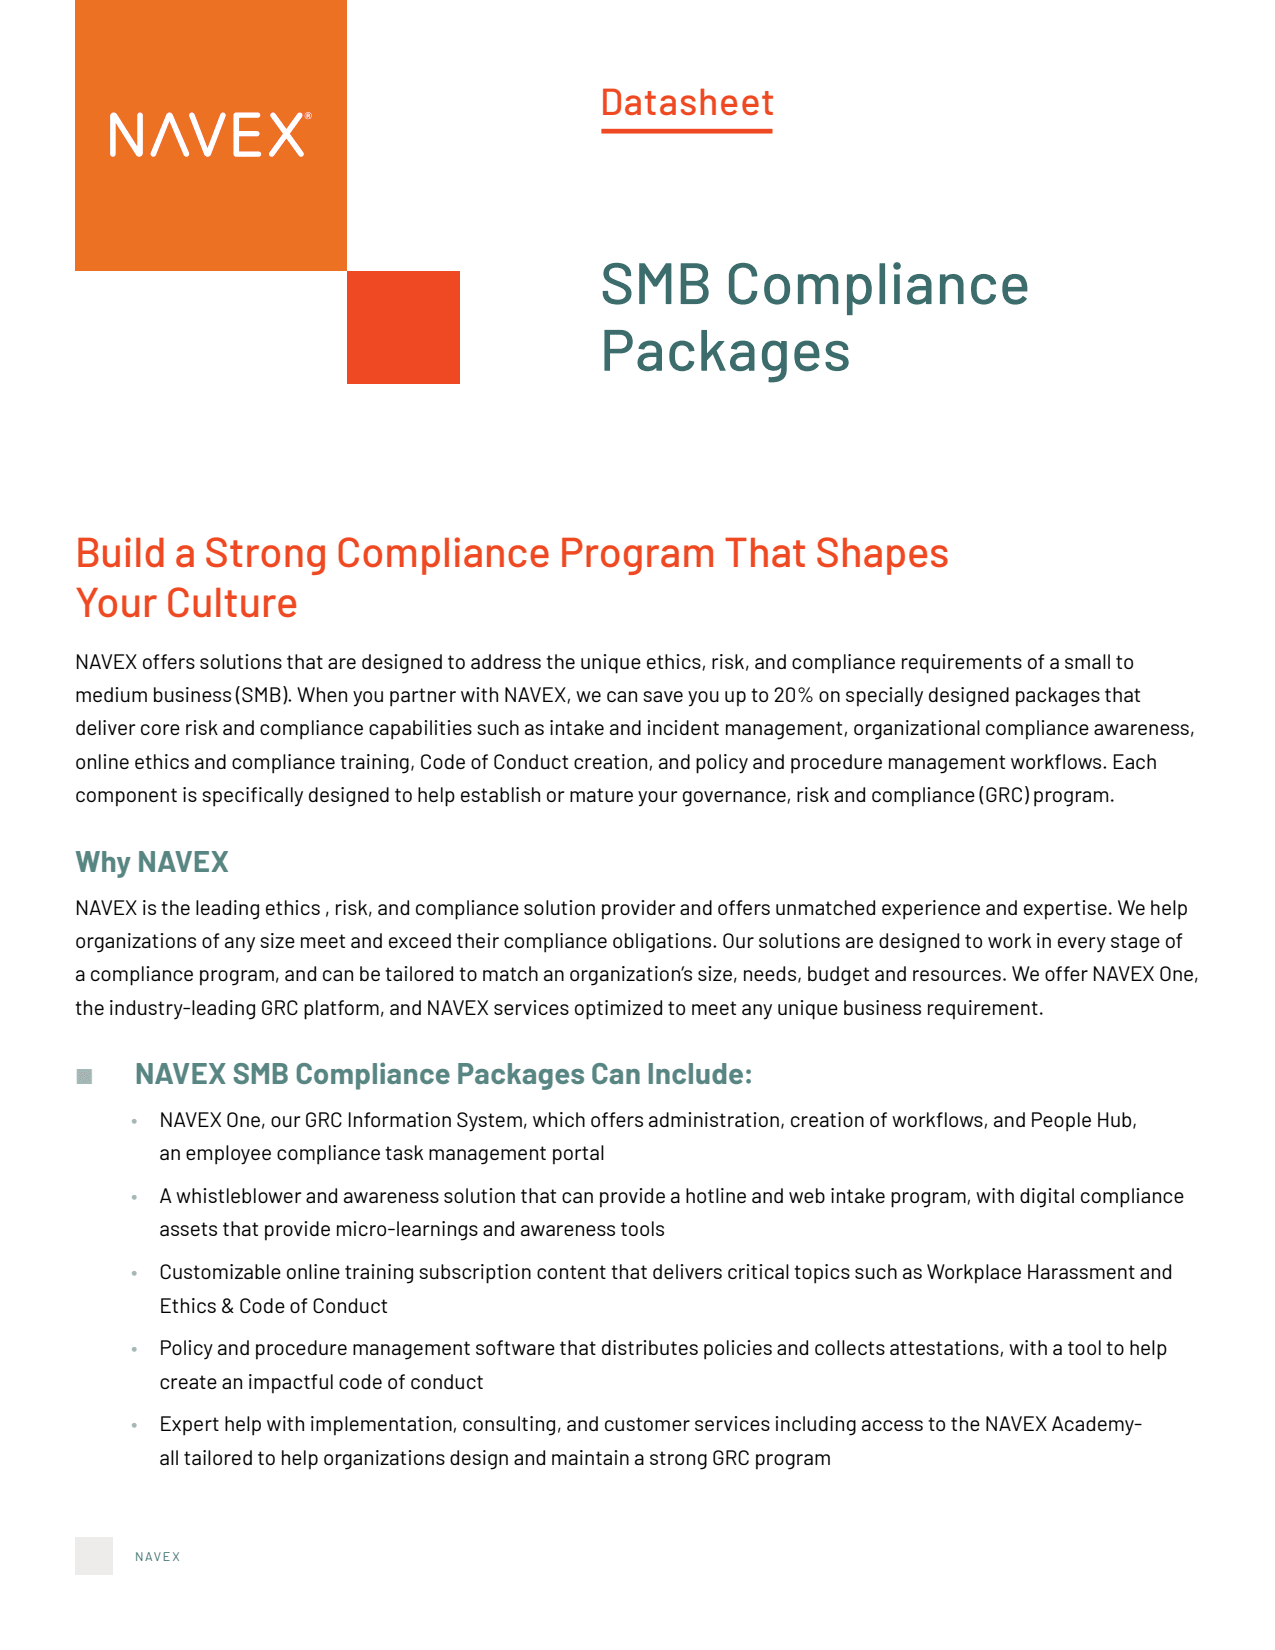 [Uncover all your SMB compliance needs in one bundle](/en-us/resources/datasheets/navex-smb-compliance-packages/)